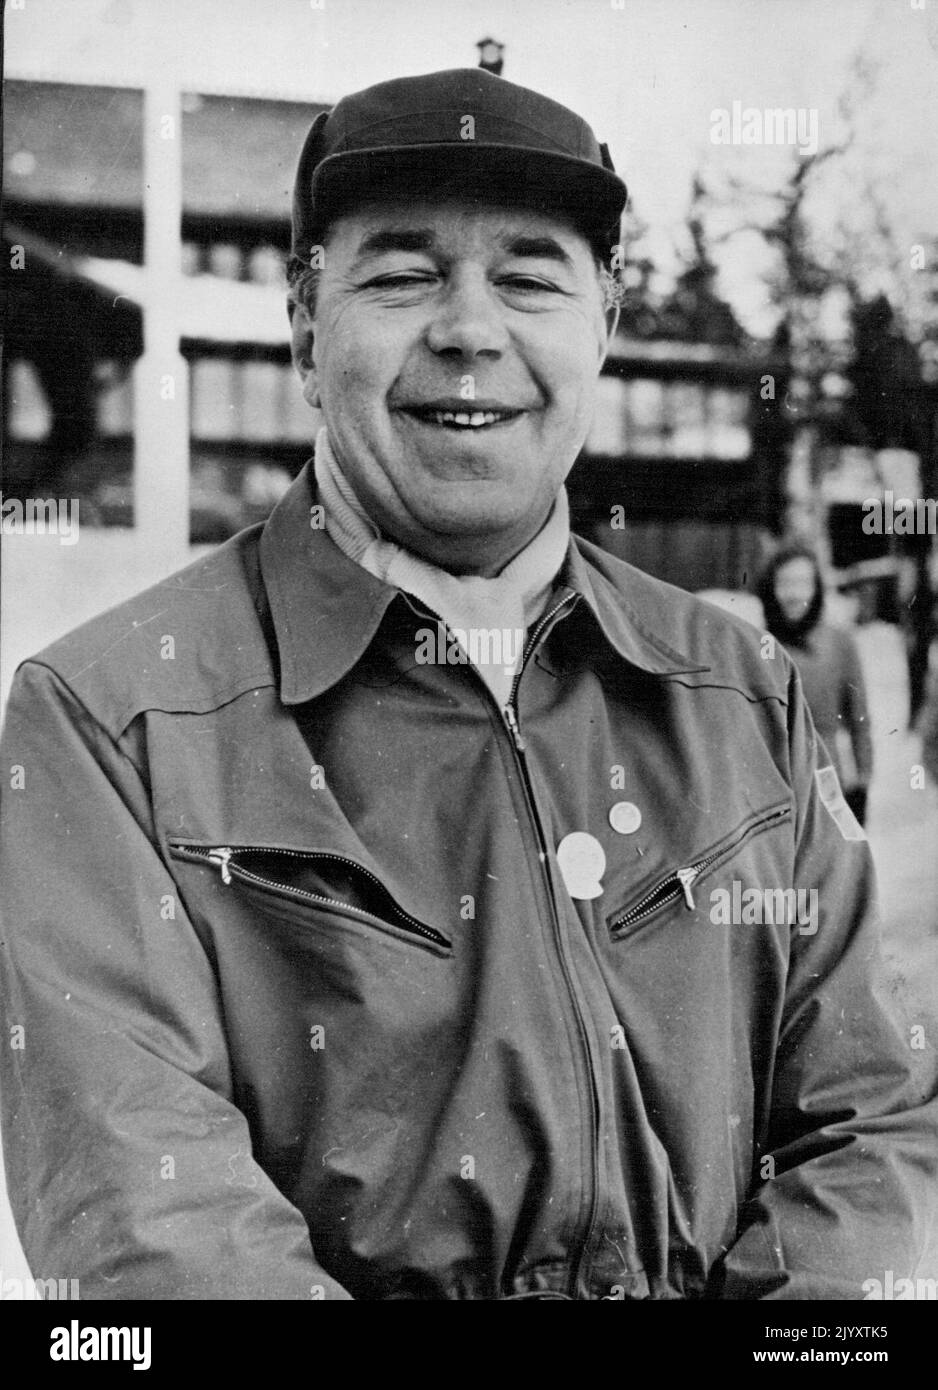 Olympic Prince has a birthday Today Prince Bertil, son of the King of Sweden, celebrates his Fortieth birthday. The Prince is leader of the Swedish Olympic troop in Oslo and this photo was taken there. February 28, 1952. (Photo by Paul Popper, Paul Popper Ltd.) Stock Photo